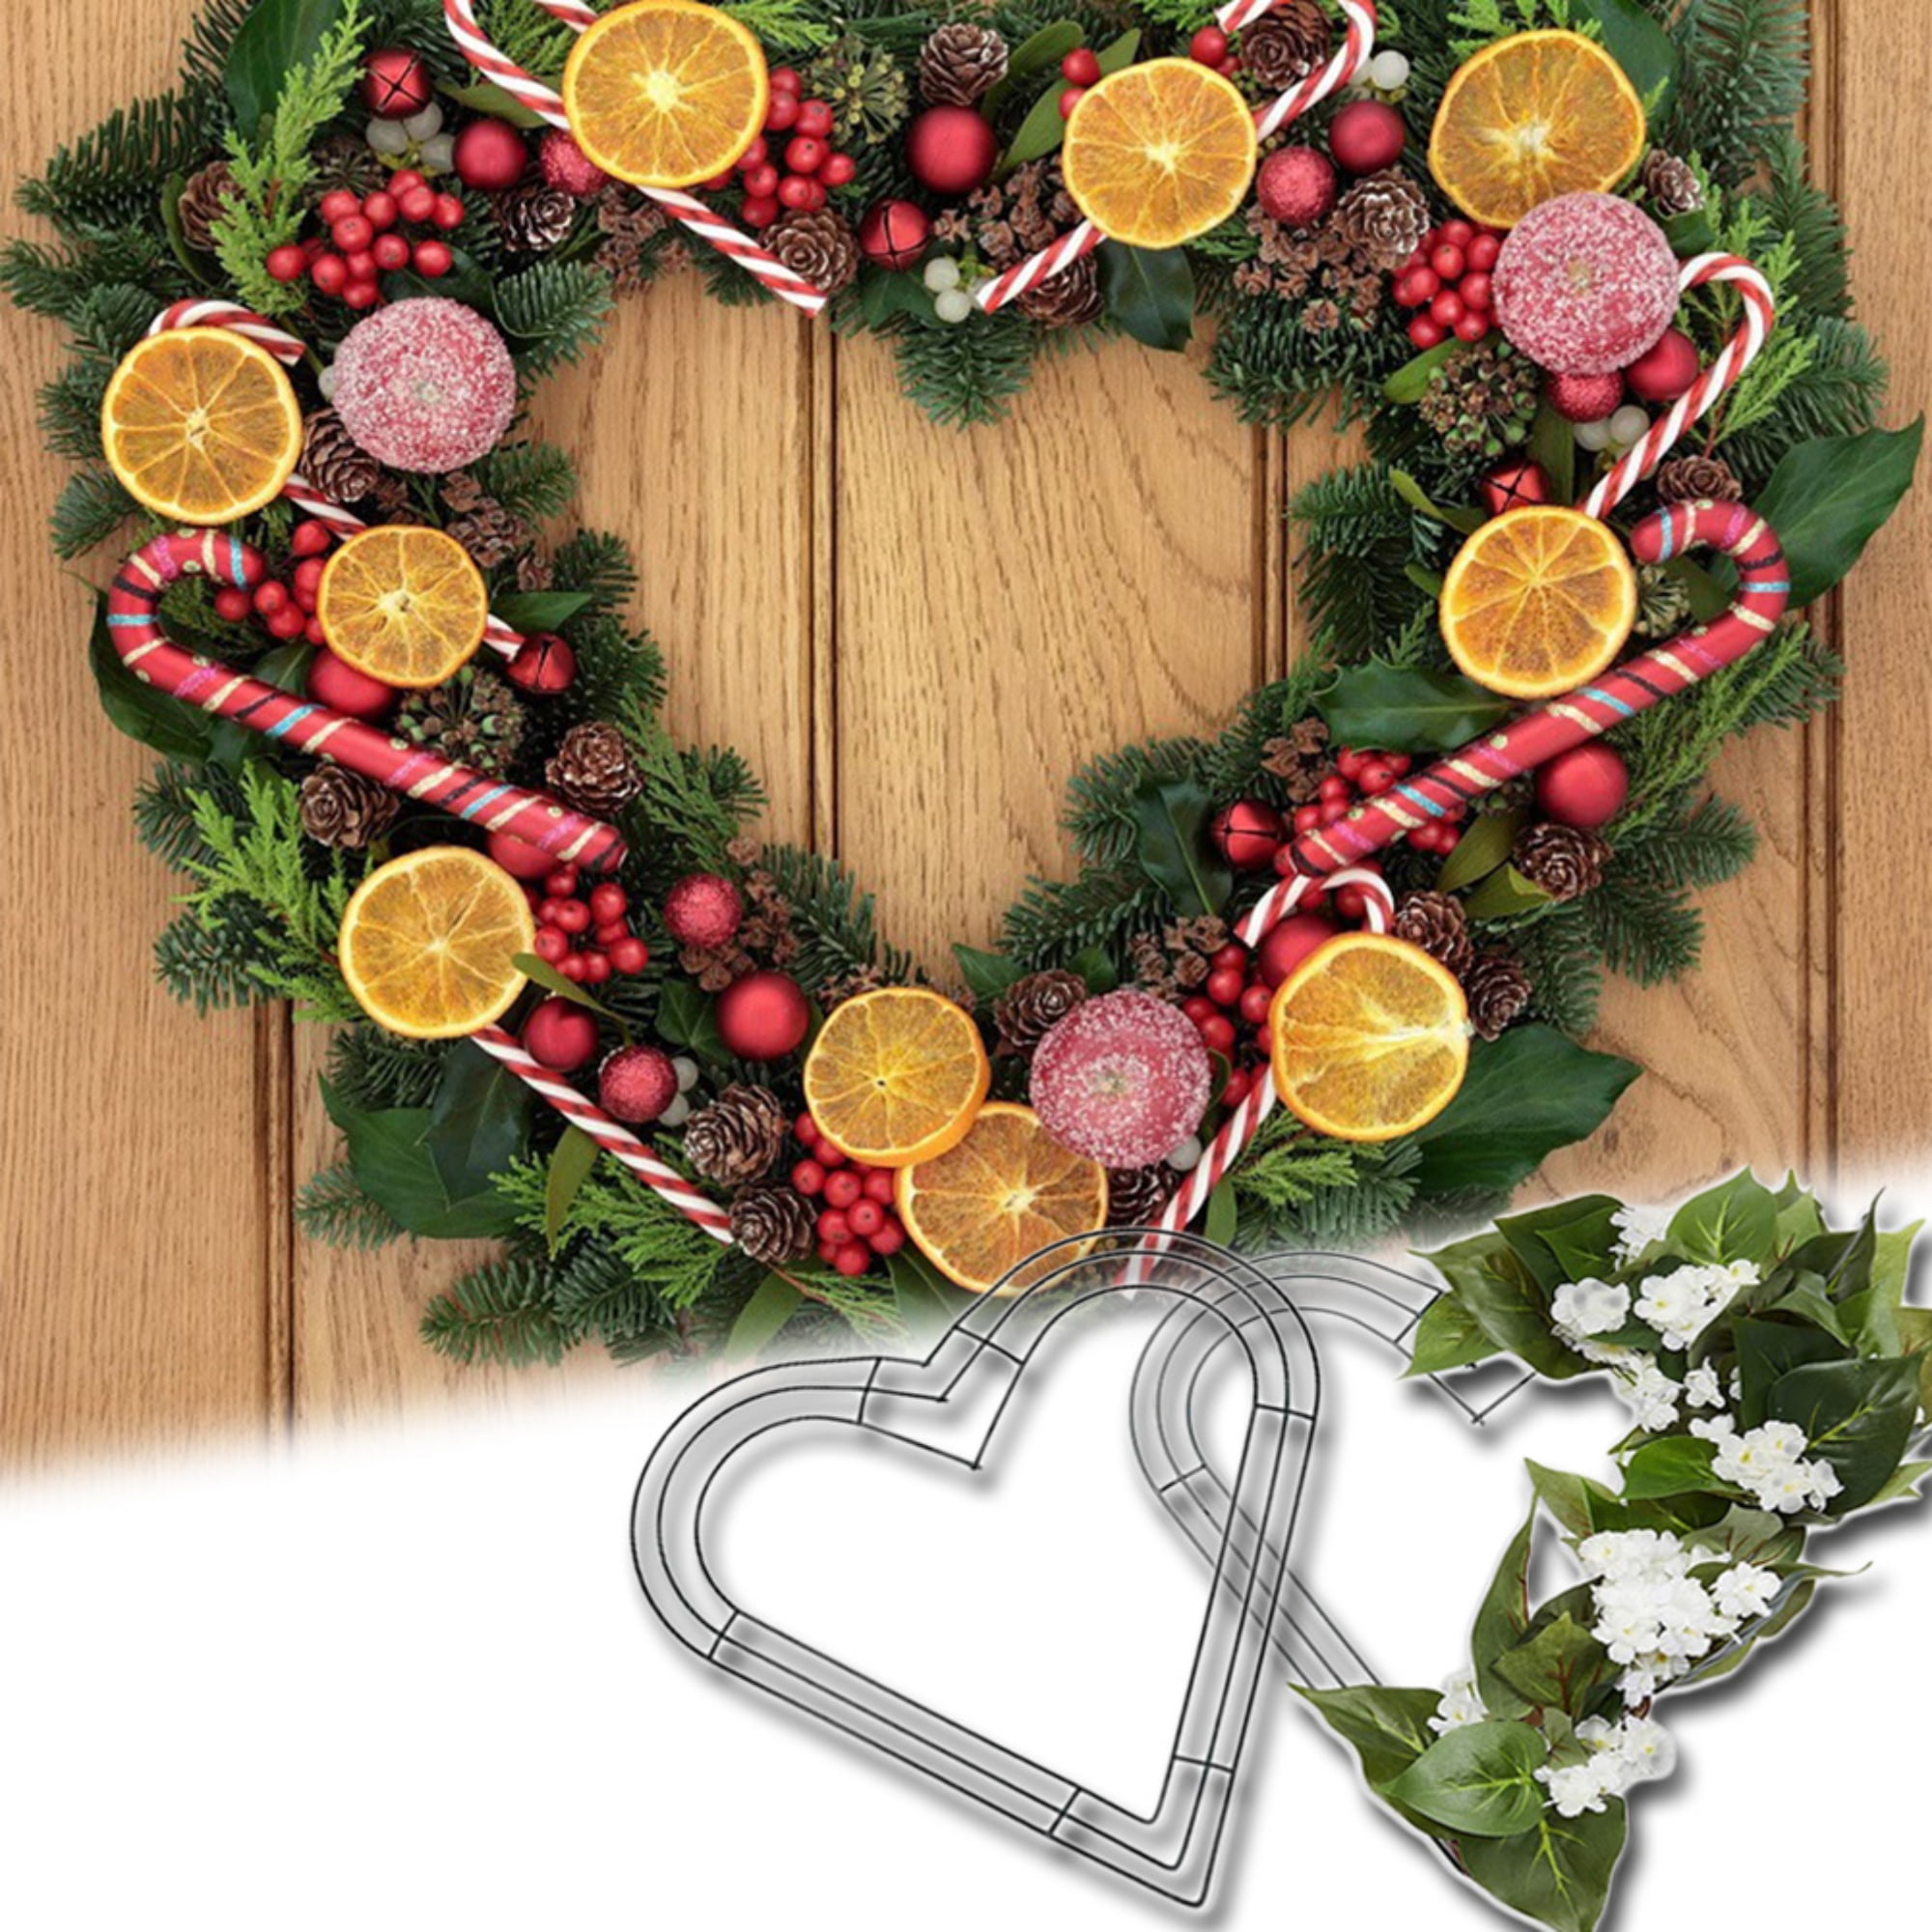 NEW - Floral Garden 12.5 HEART Wire Wreath Form - FREE SHIP!